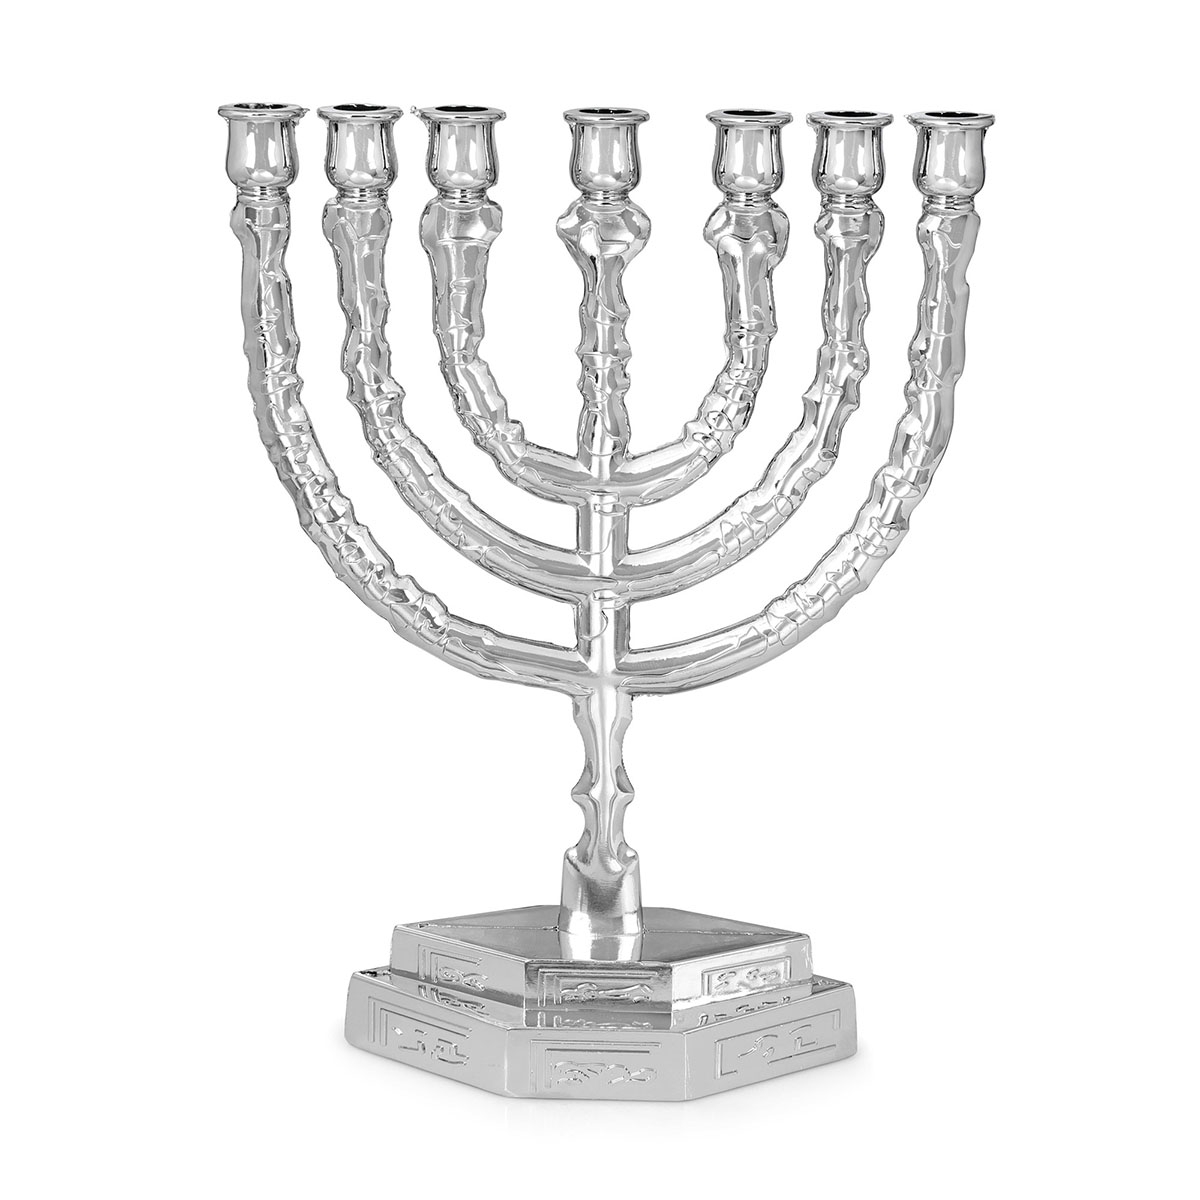 Large Seven-Branched Menorah With Ornate Design (Variety of Colors)  - 1